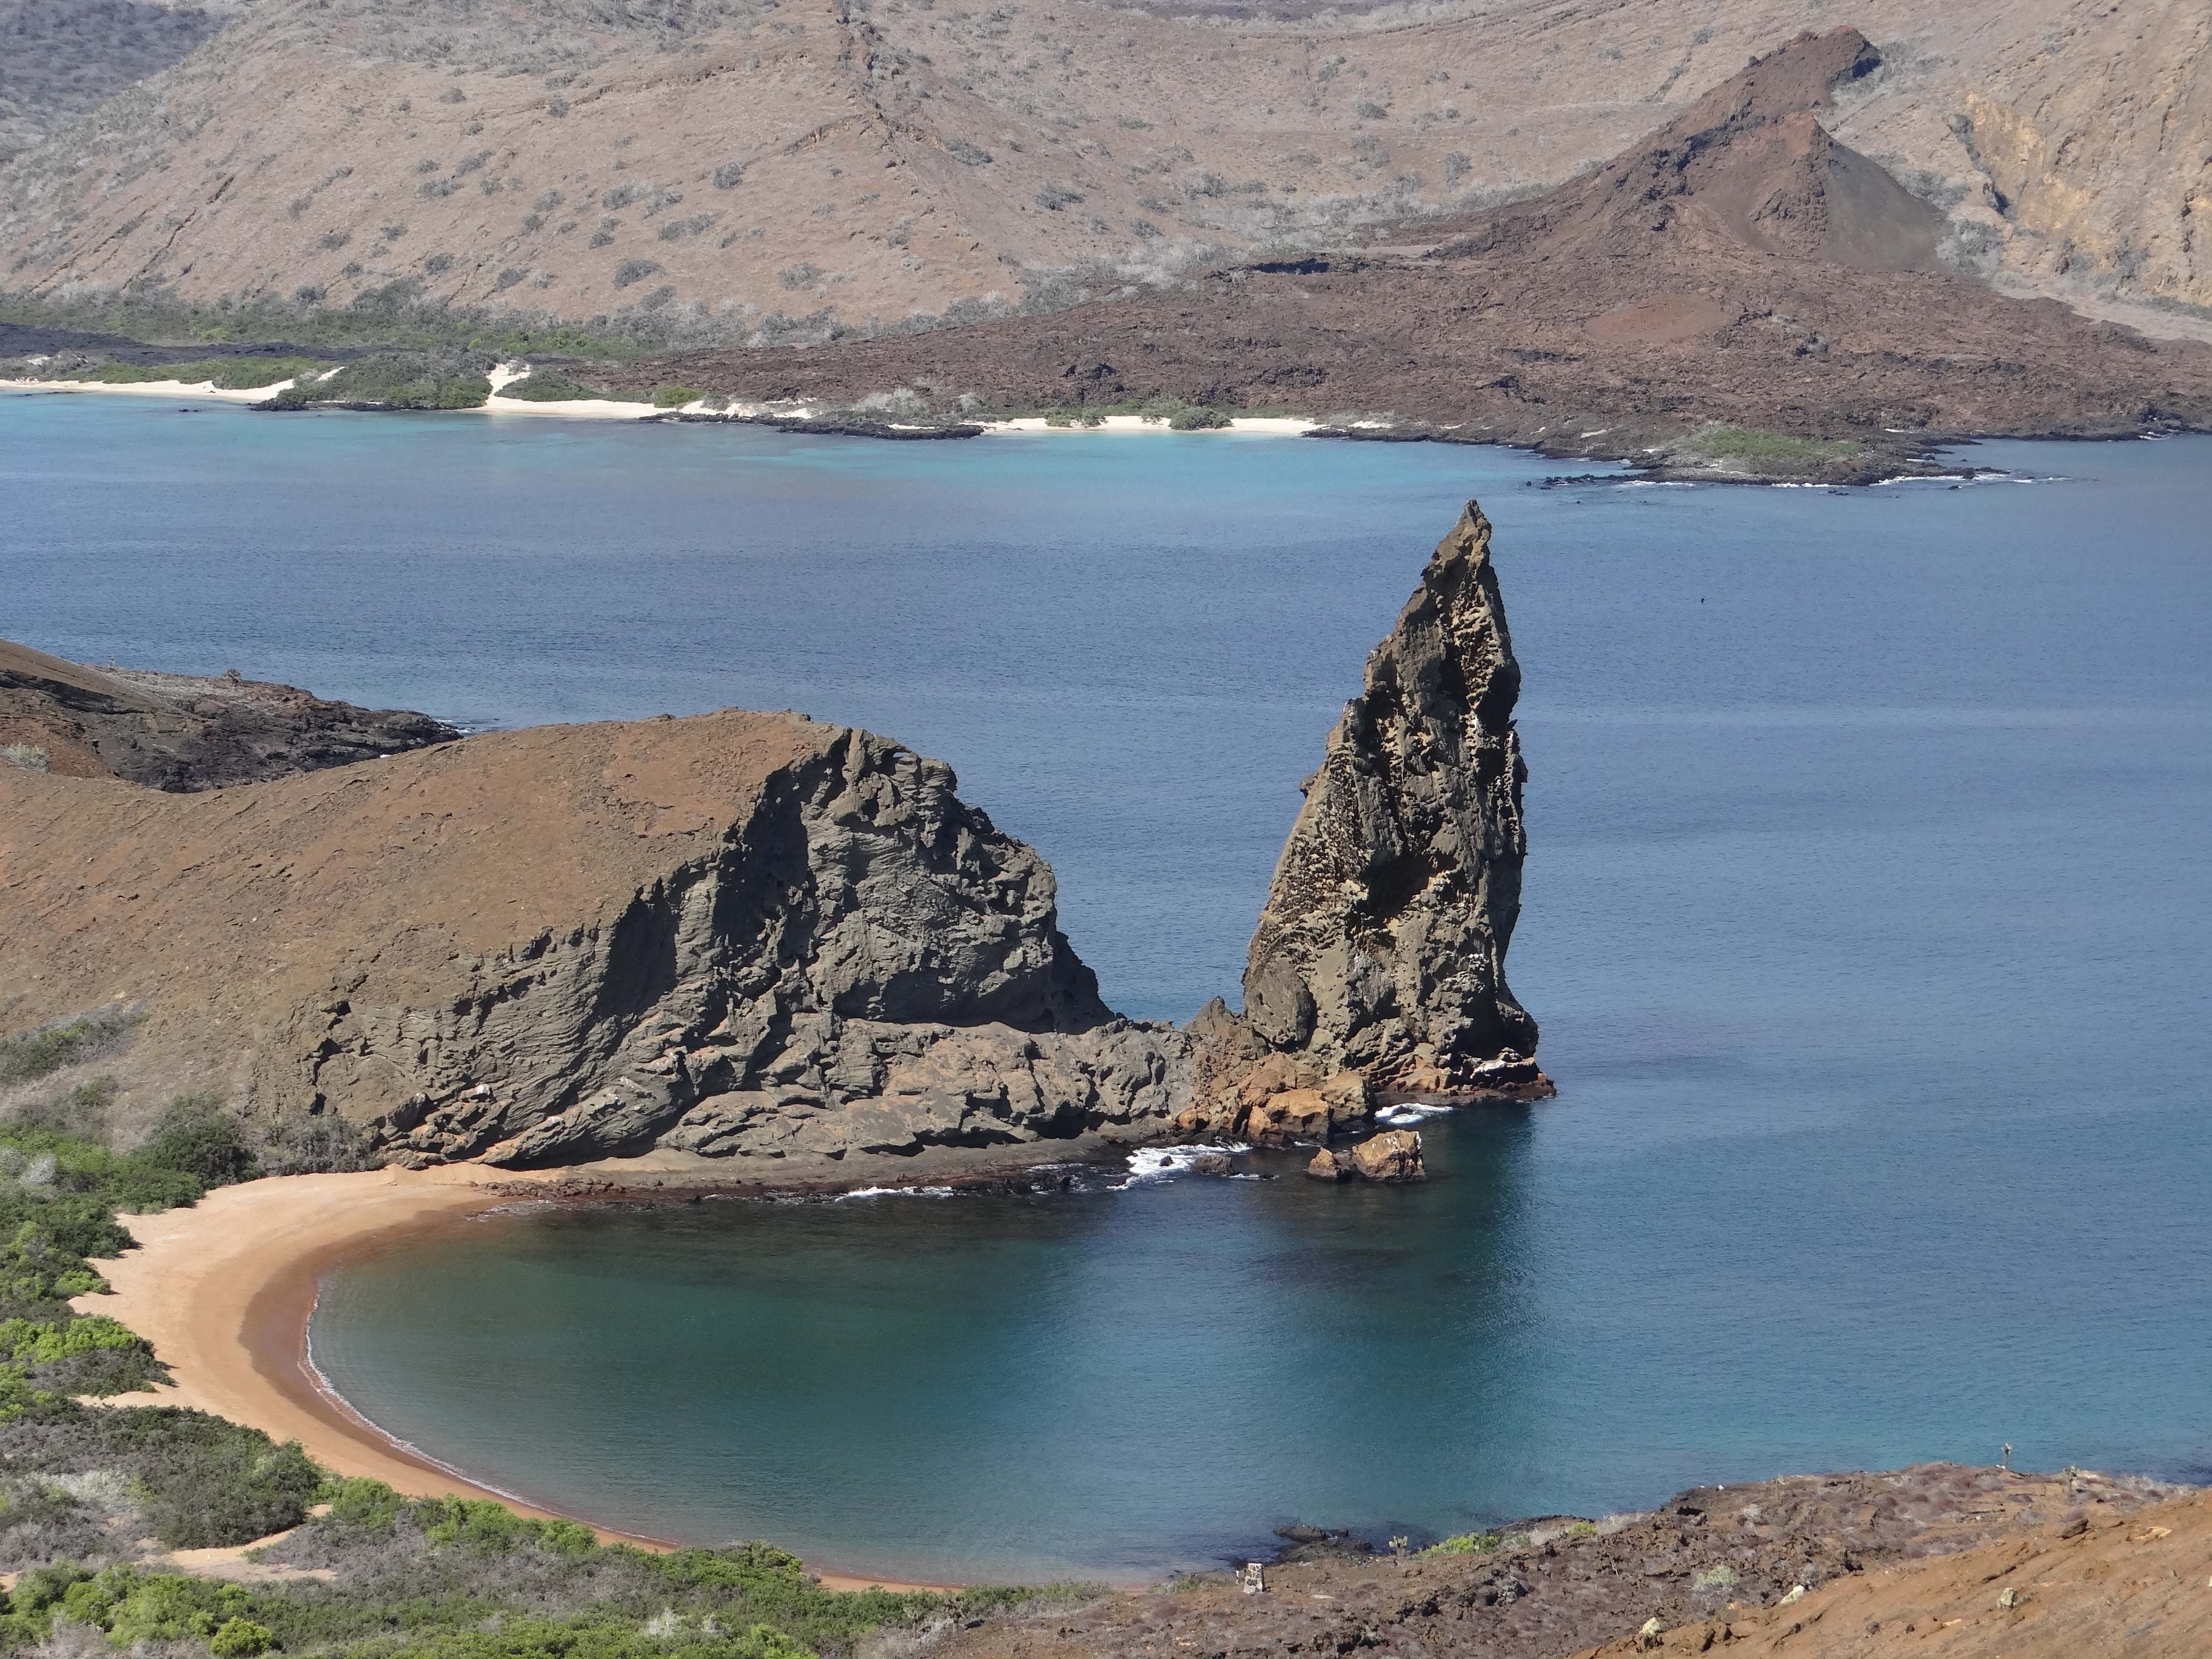 A picture of a portion of the Galápagos coastline.